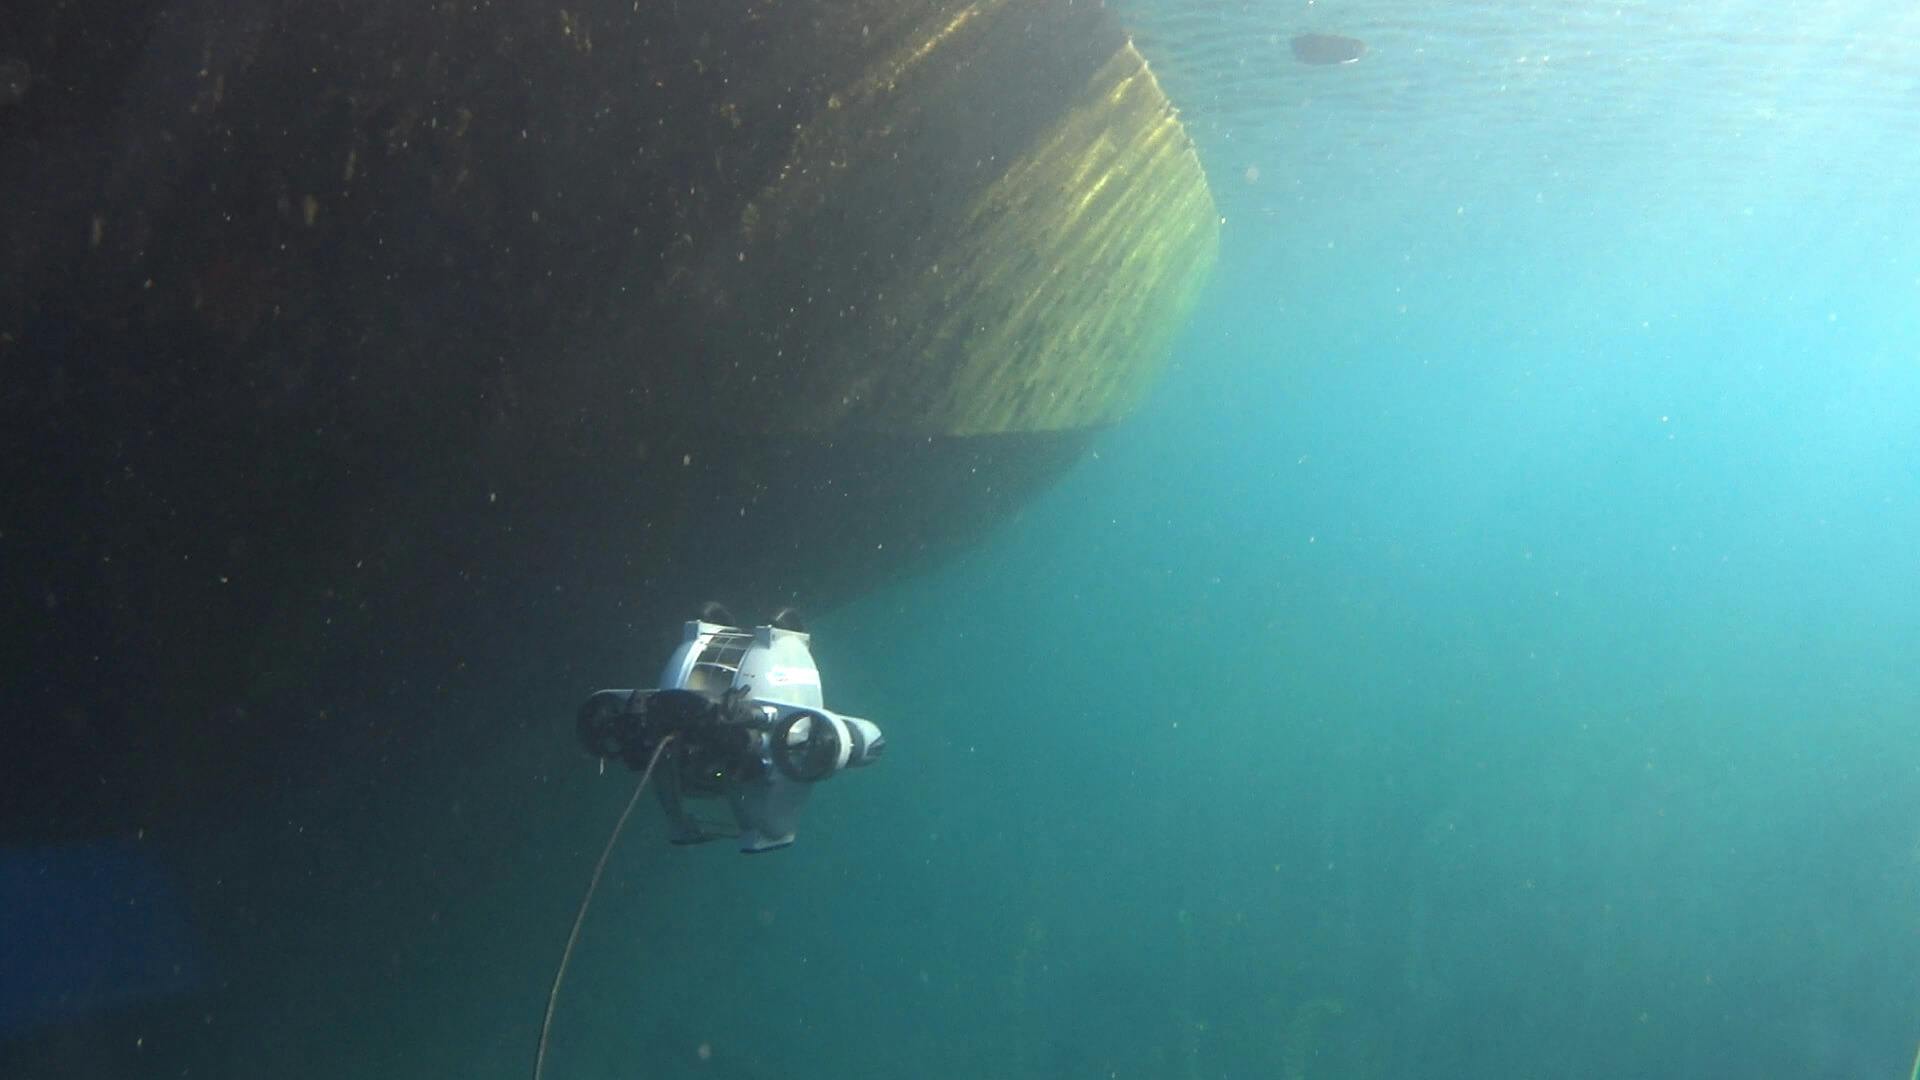 DTG3 inspection a ships hull underwater